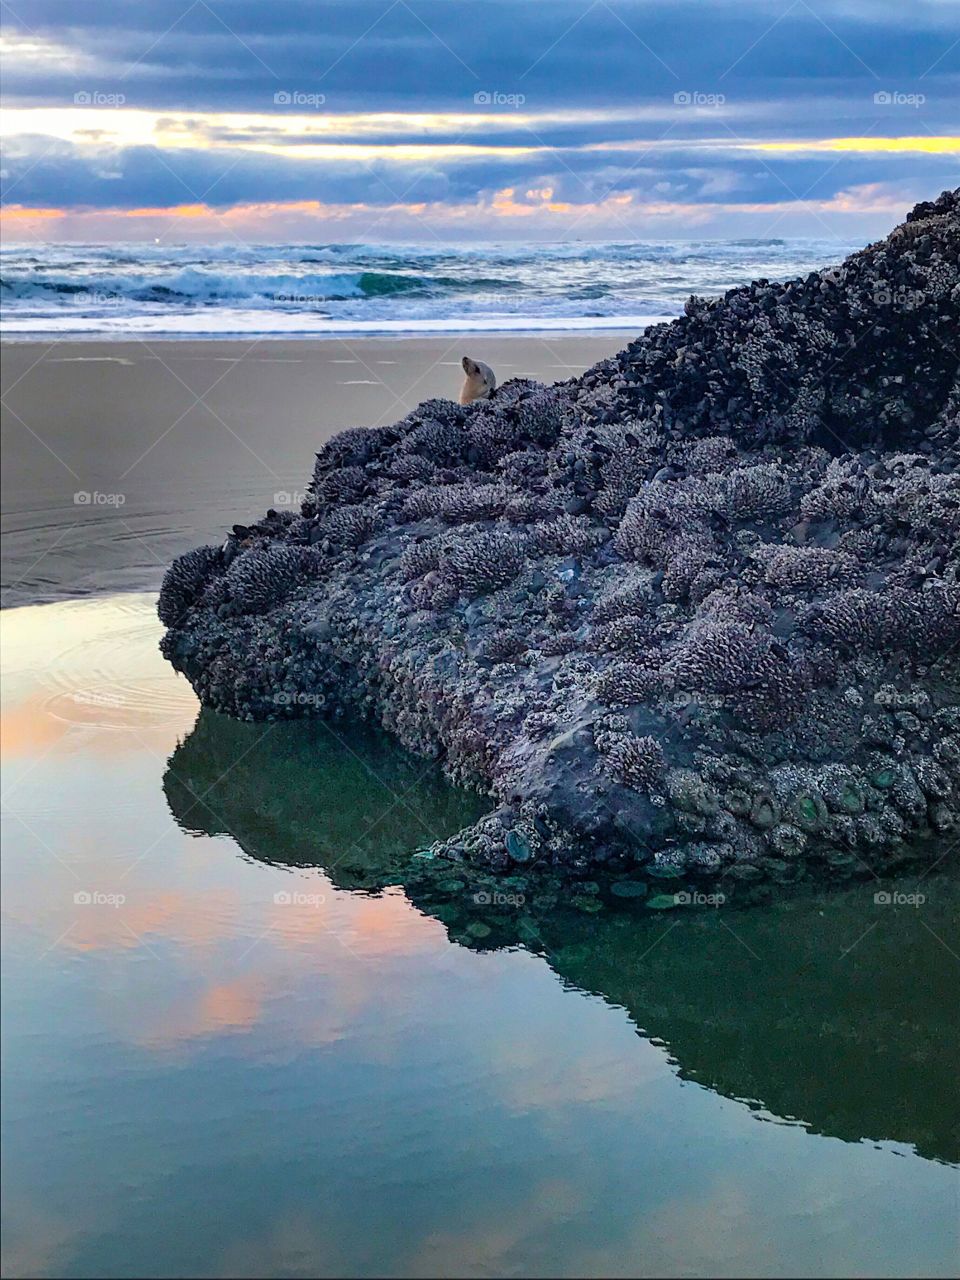 “Sunset Loving Sea Lion 1” A sea lion basks in the light of the colorful sunset sky.